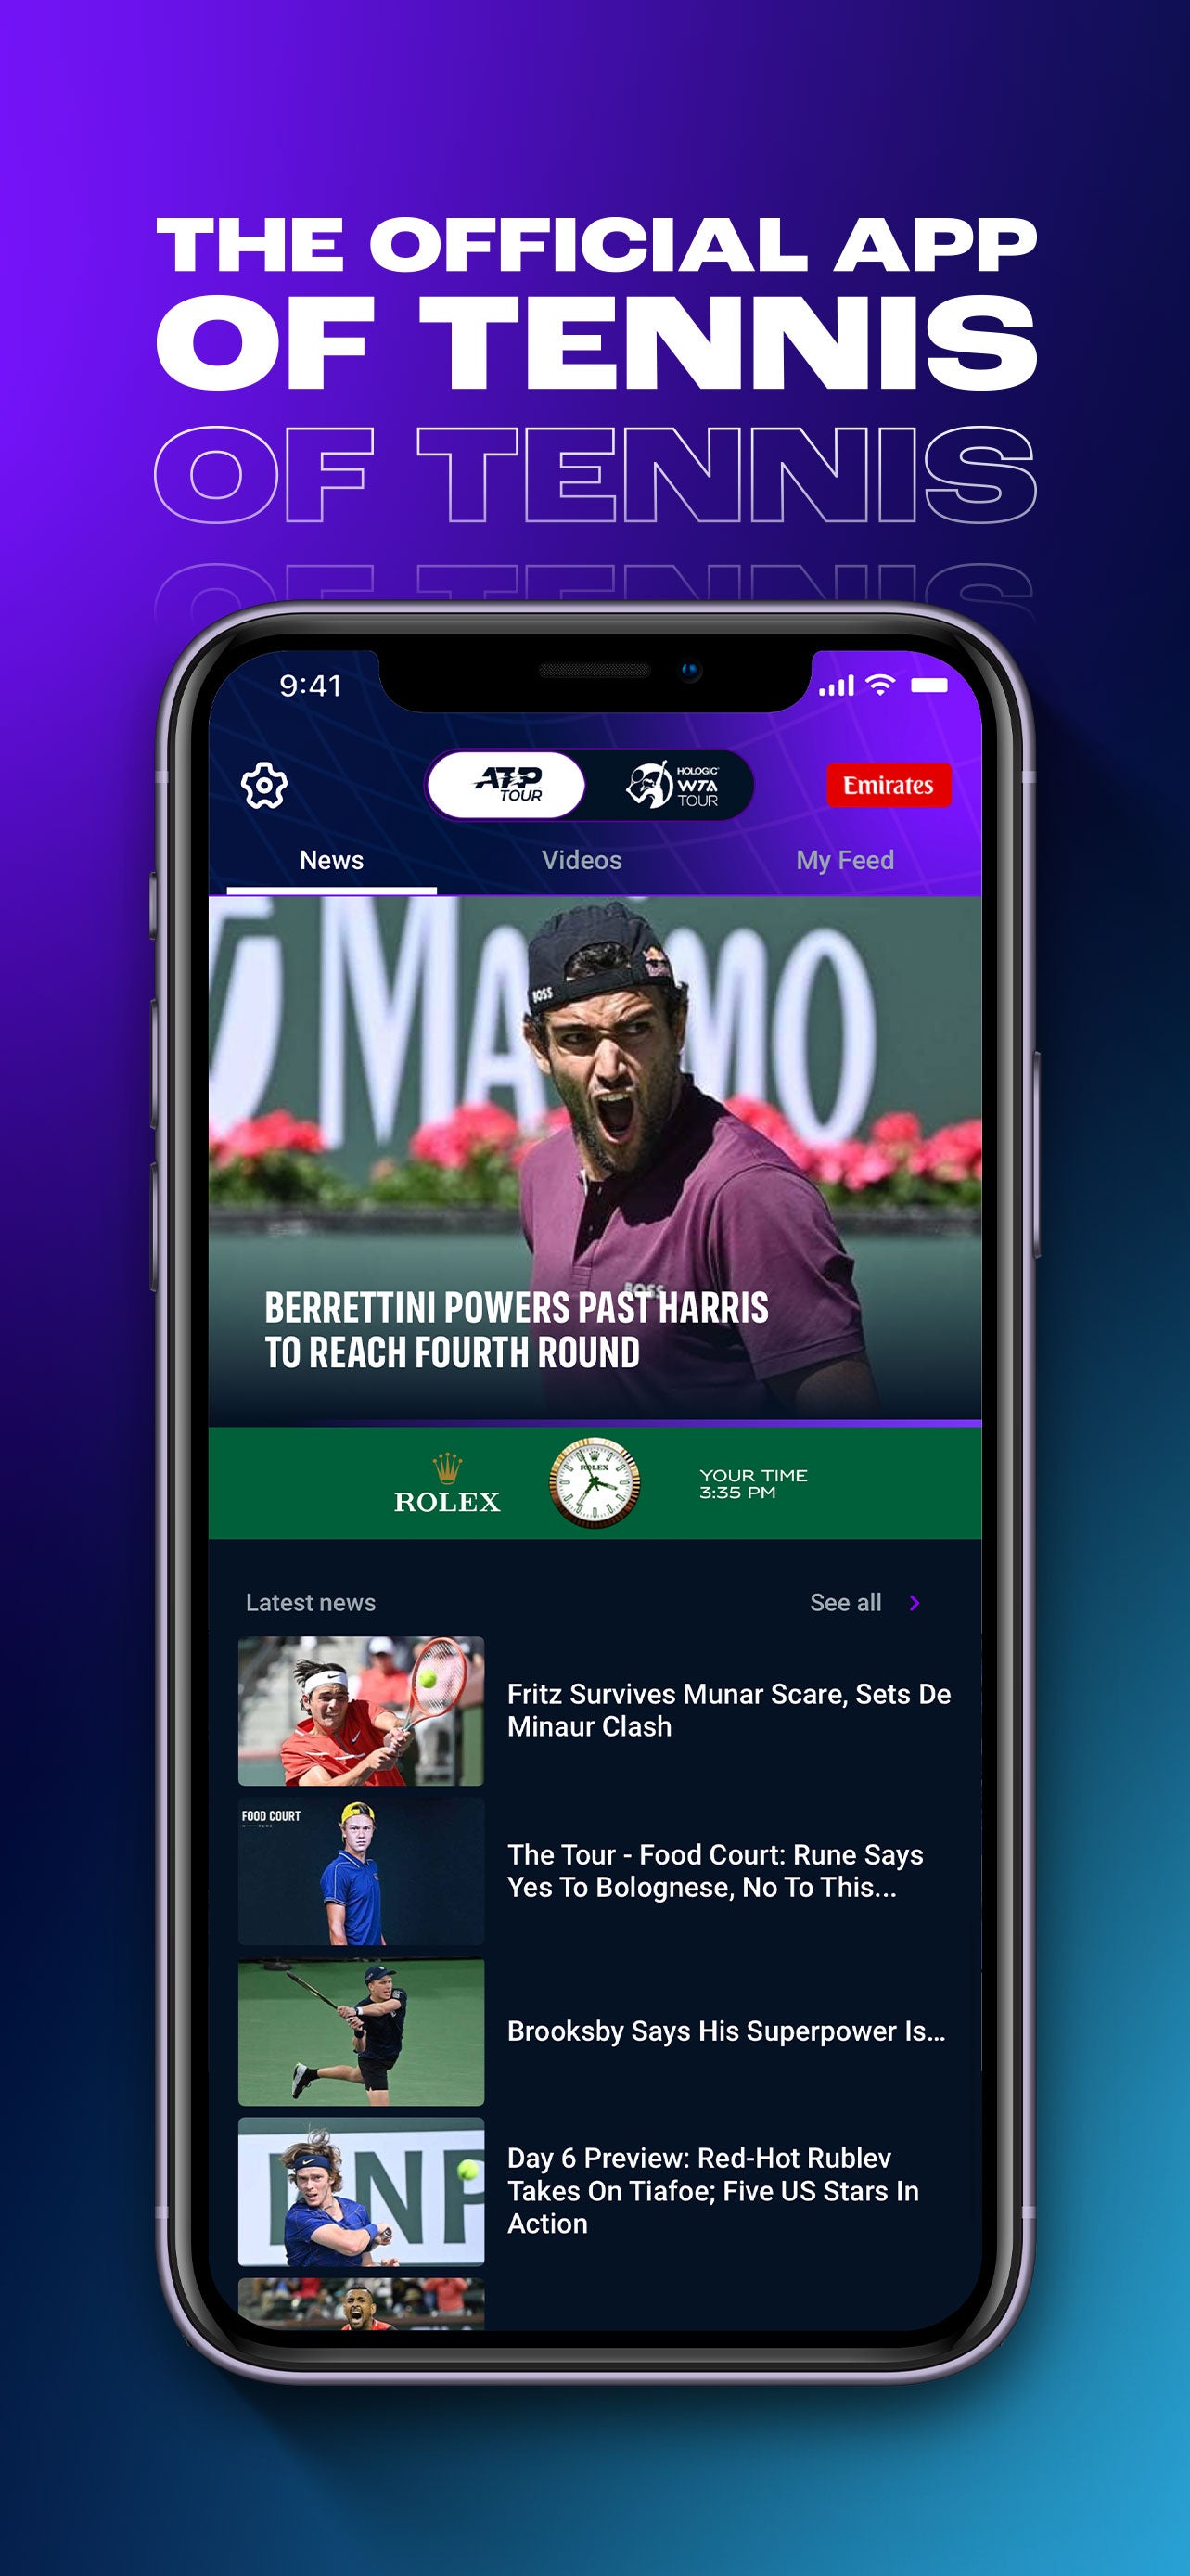 The new app will offer news and score updates from across both tours. (ATP/WTA)